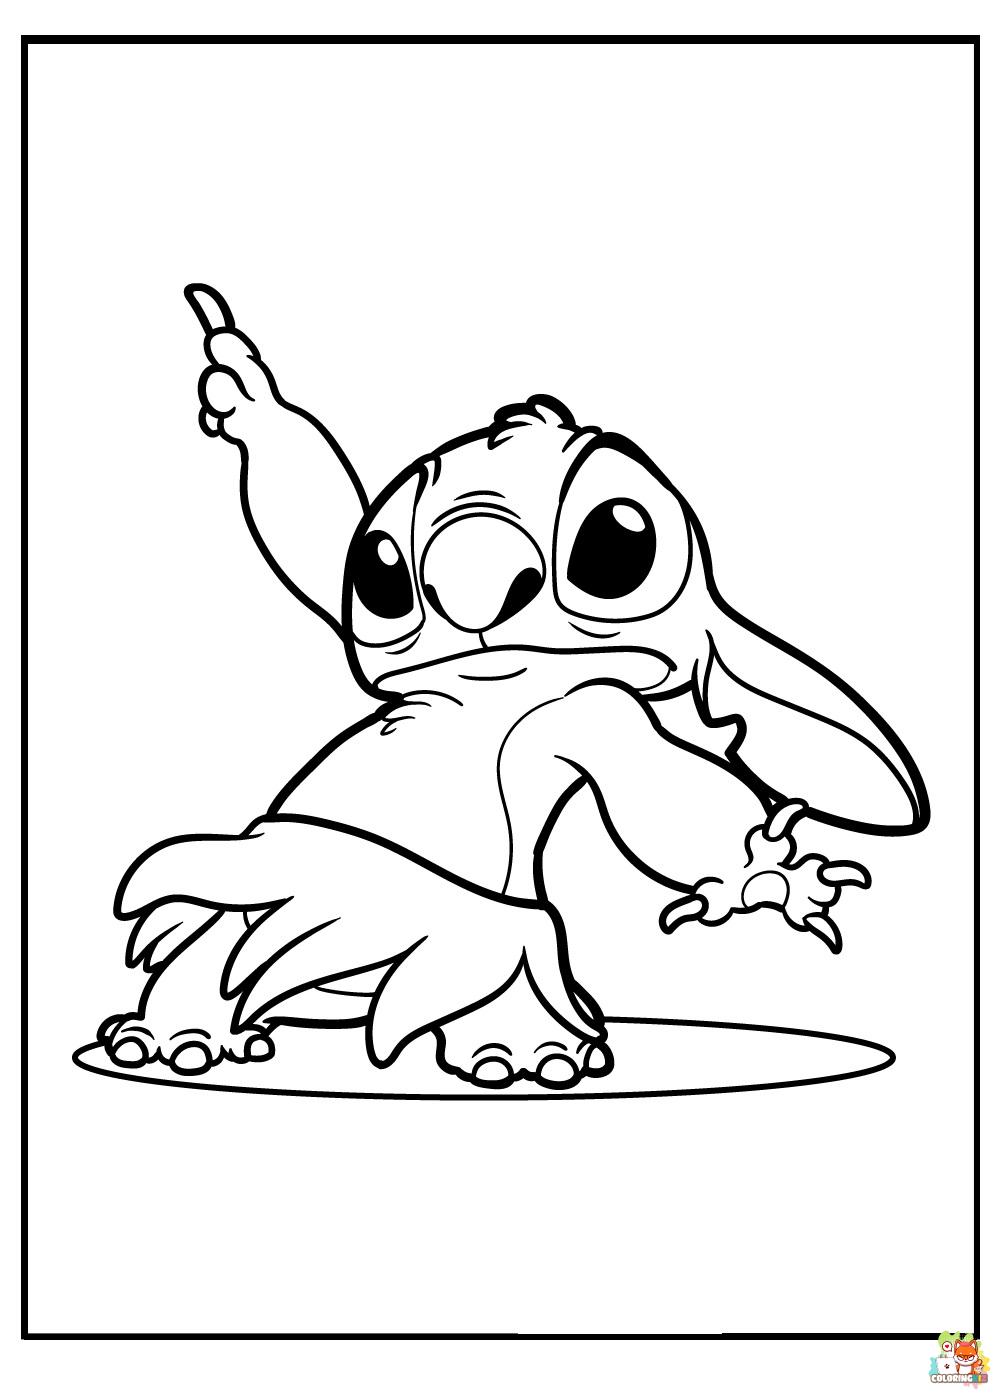 Stitch on the Beach Coloring Pages 13